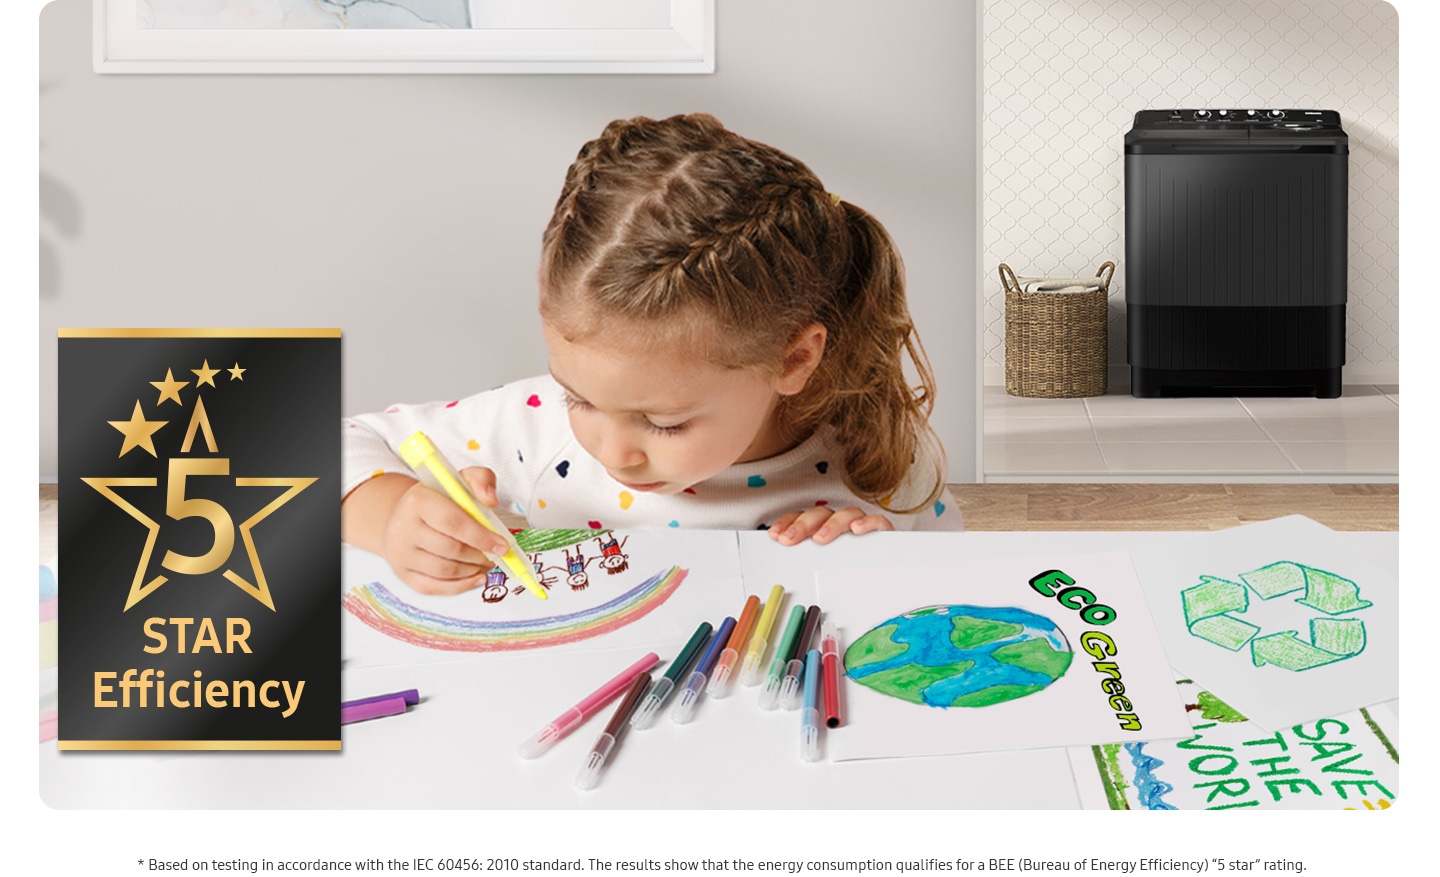 A child is drawing an image related to energy saving, and the WT4000BM product stands behind her. The 5-star efficiency logo is on the side.